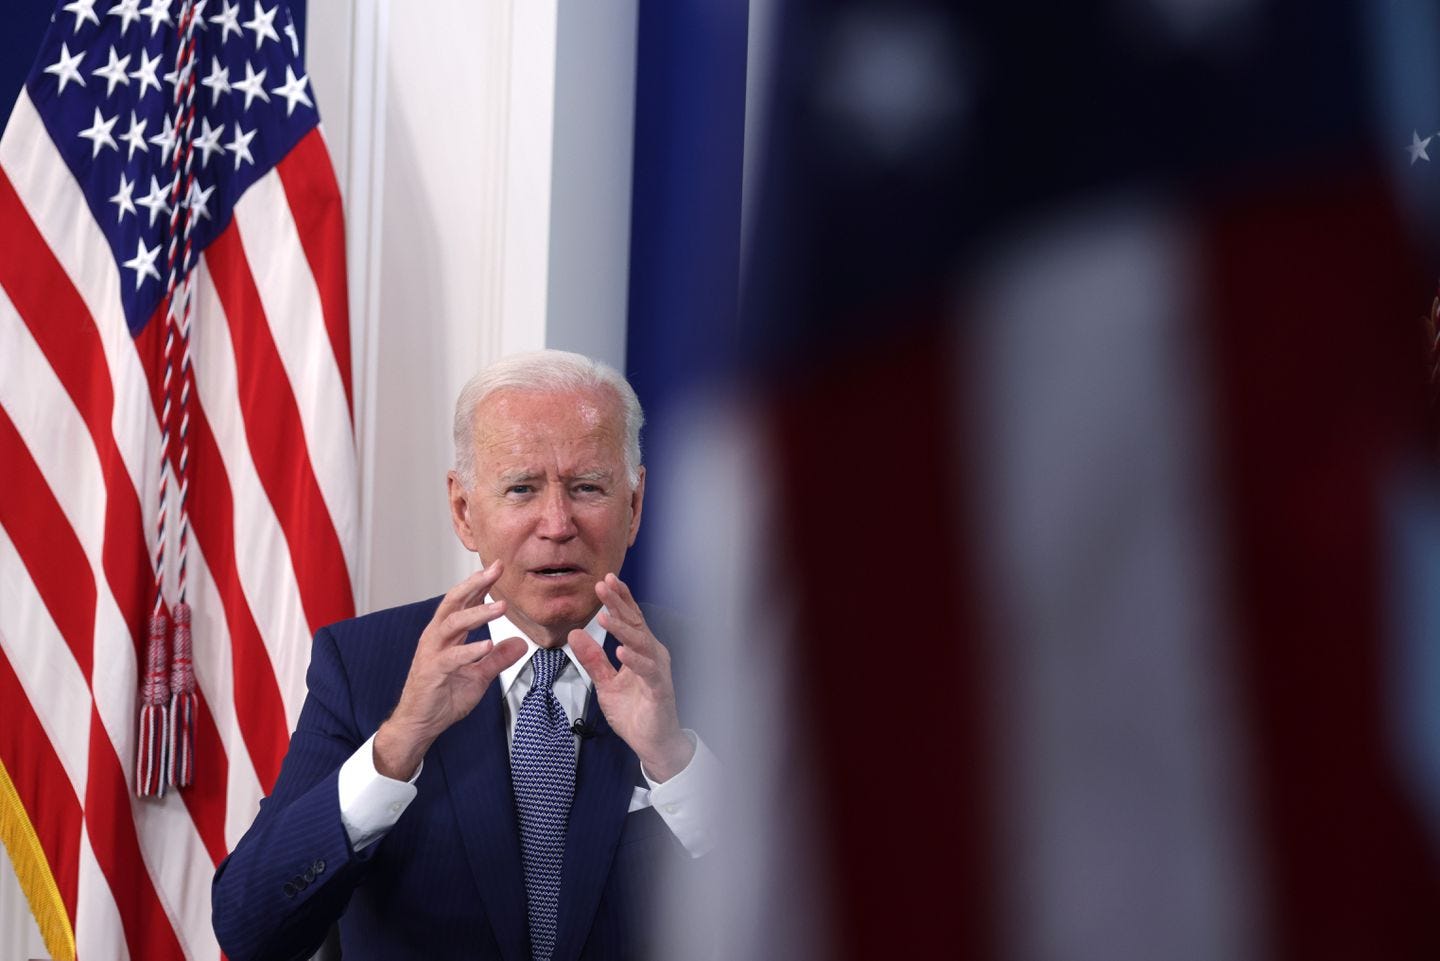 President Biden spoke Wednesday during a virtual COVID summit of the United Nations General Assembly.